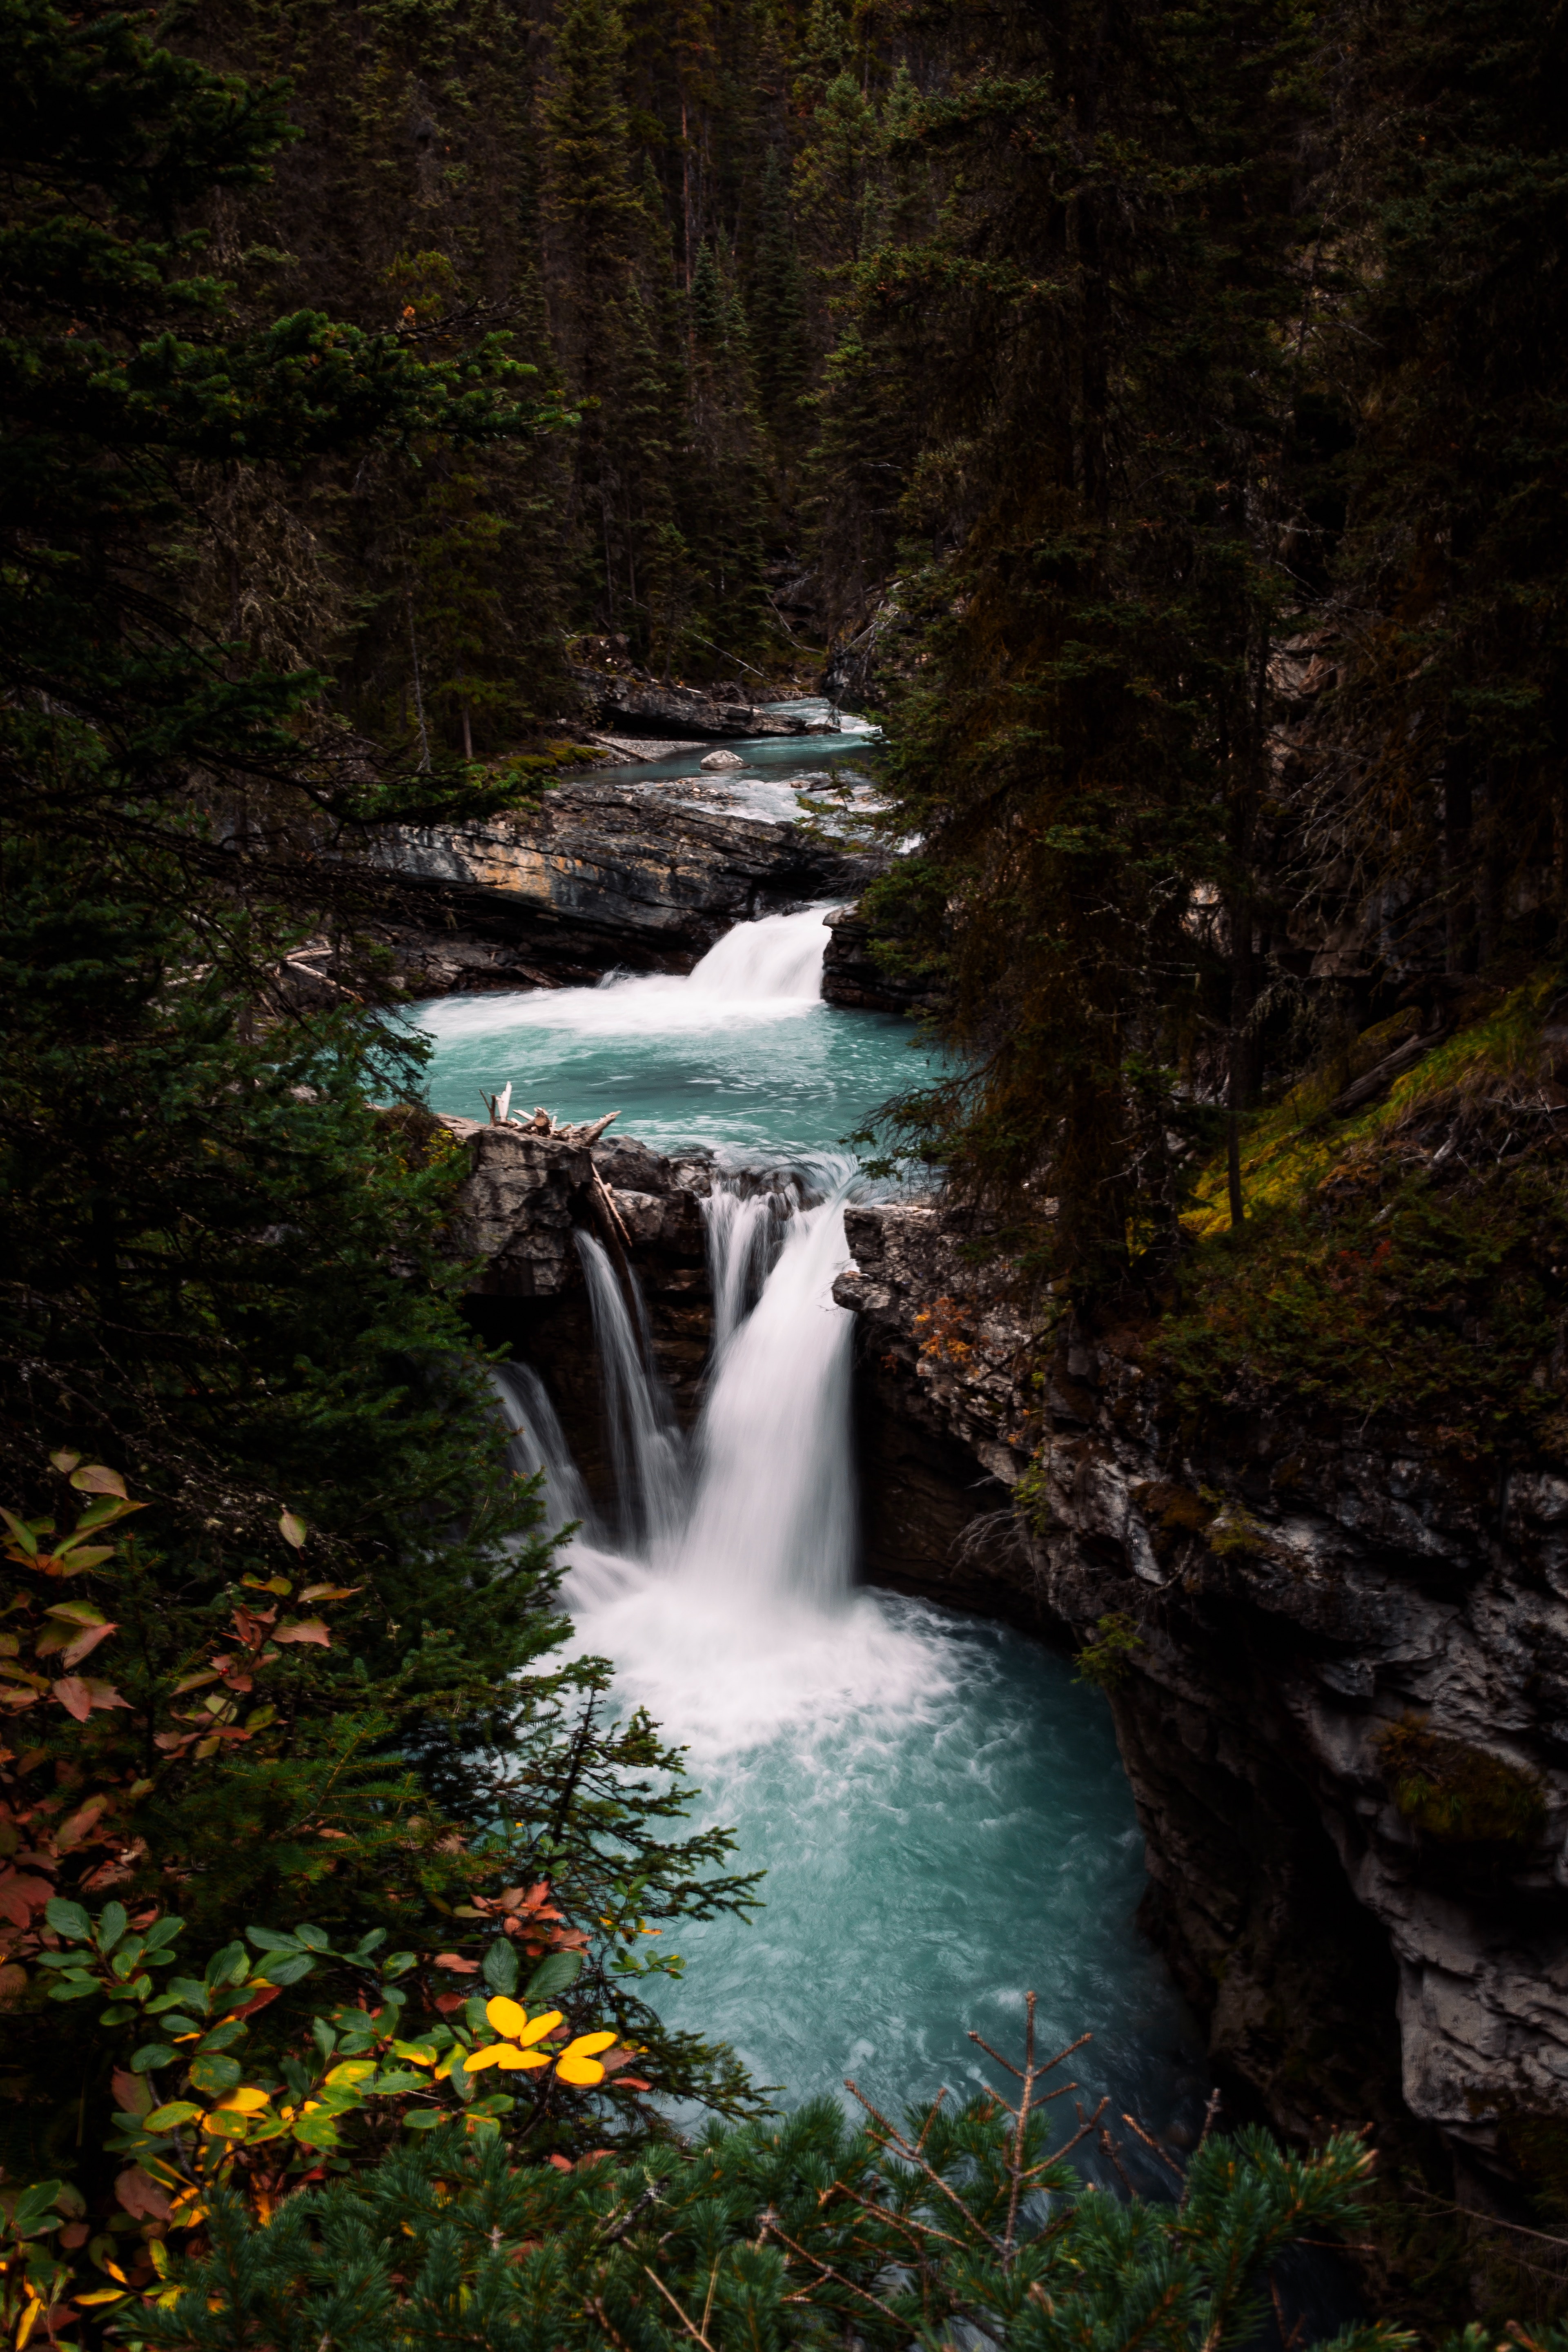 rivers, waterfall, landscape, nature, forest